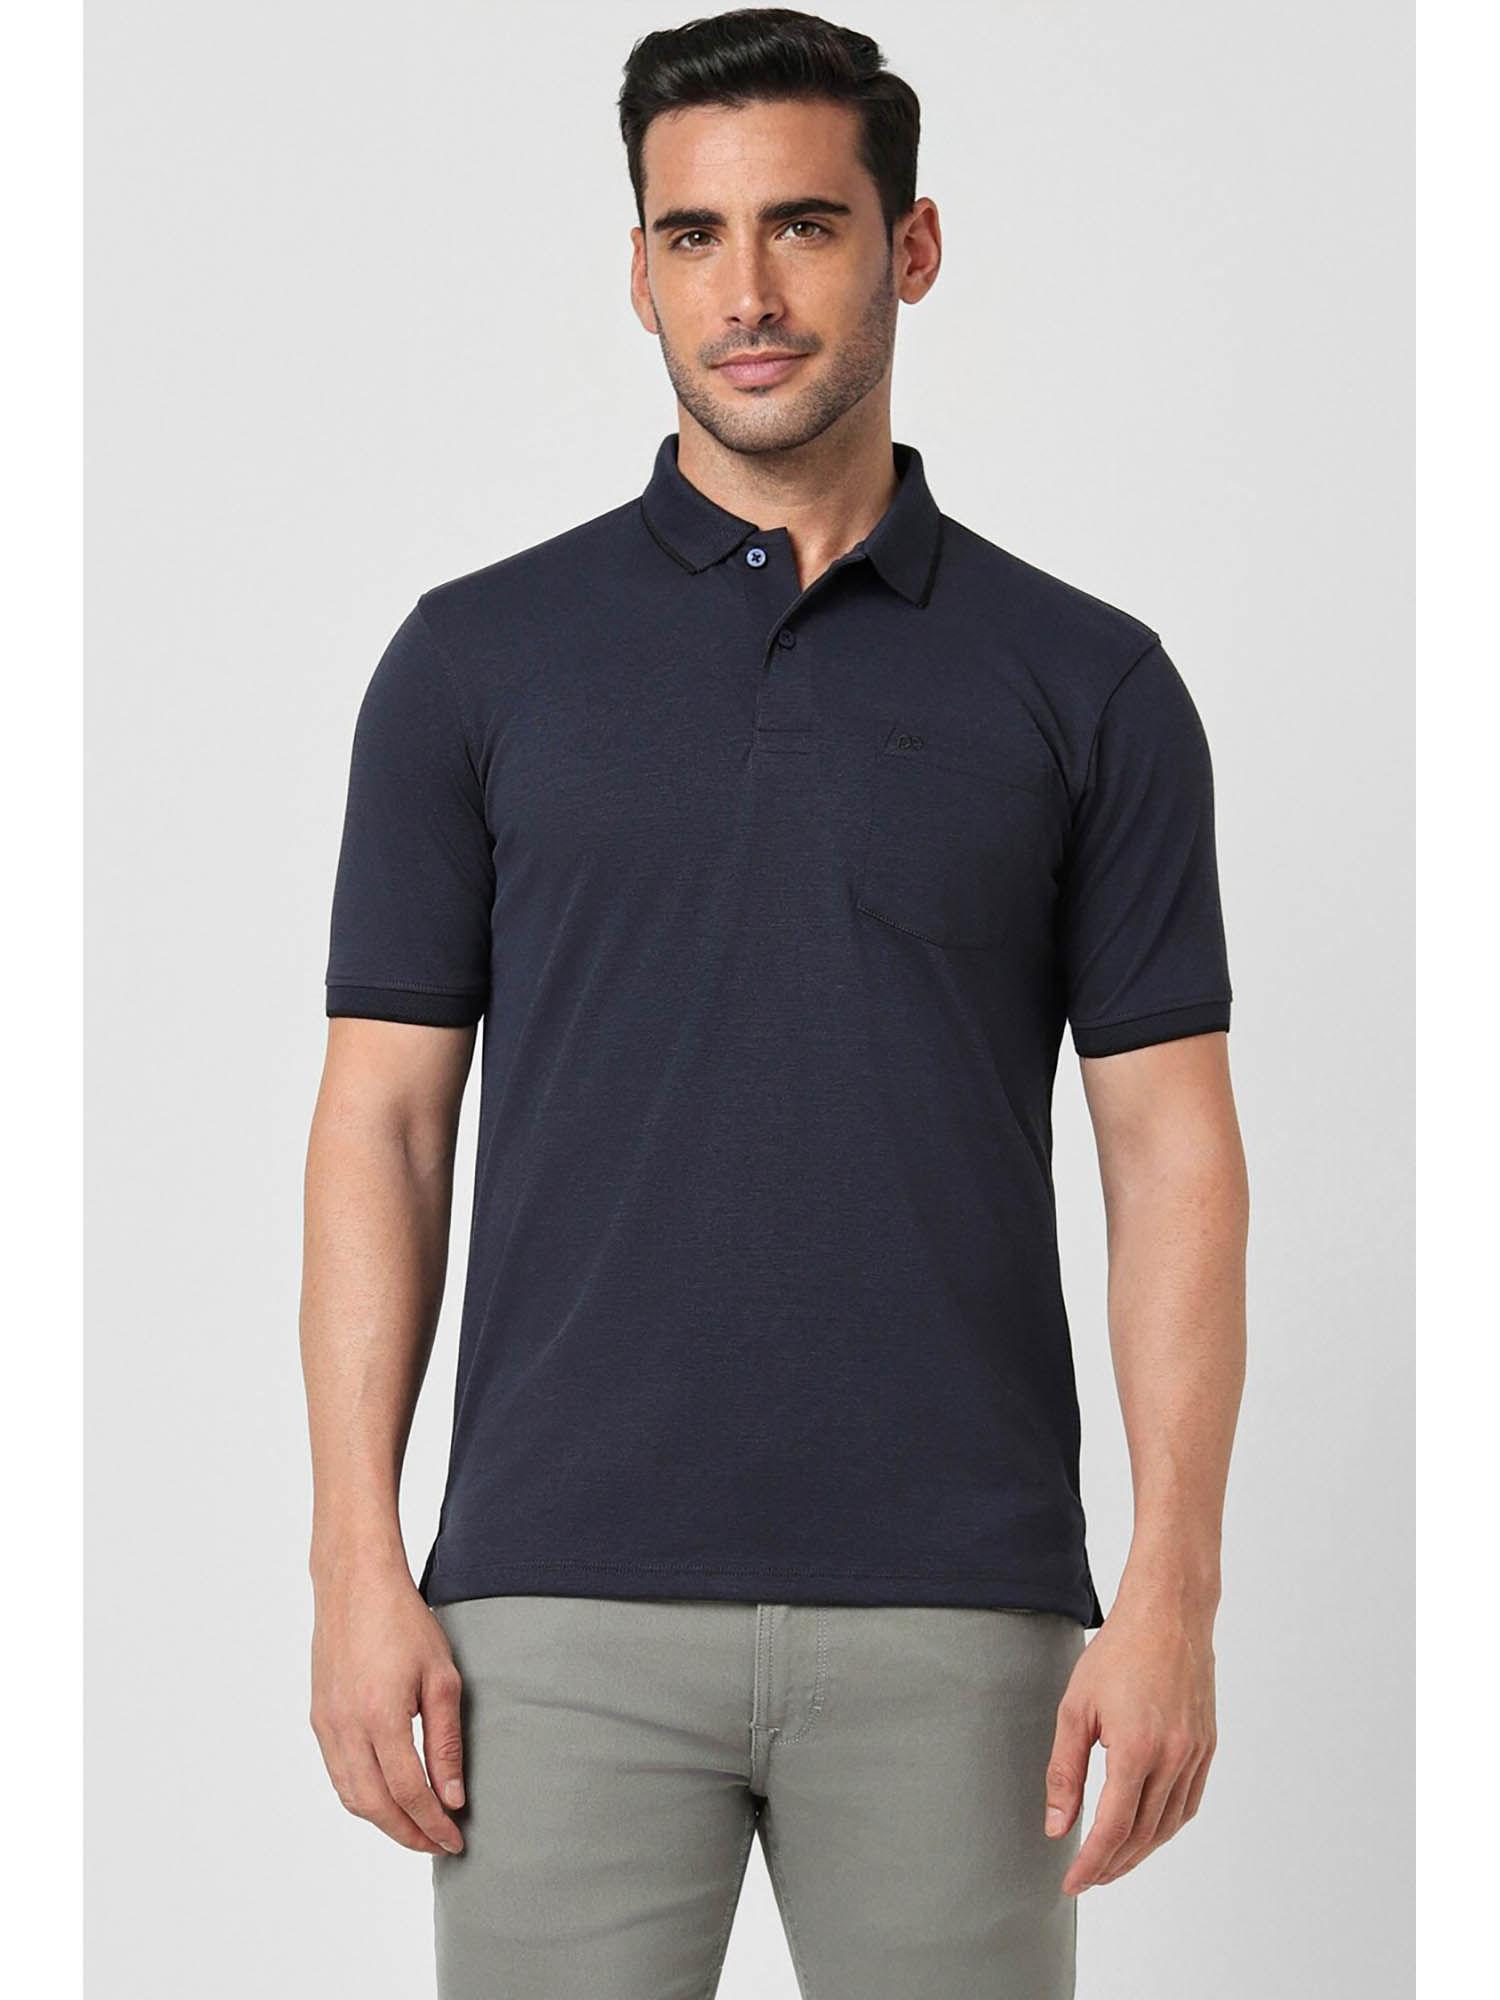 men-navy-blue-solid-collar-neck-polo-t-shirts